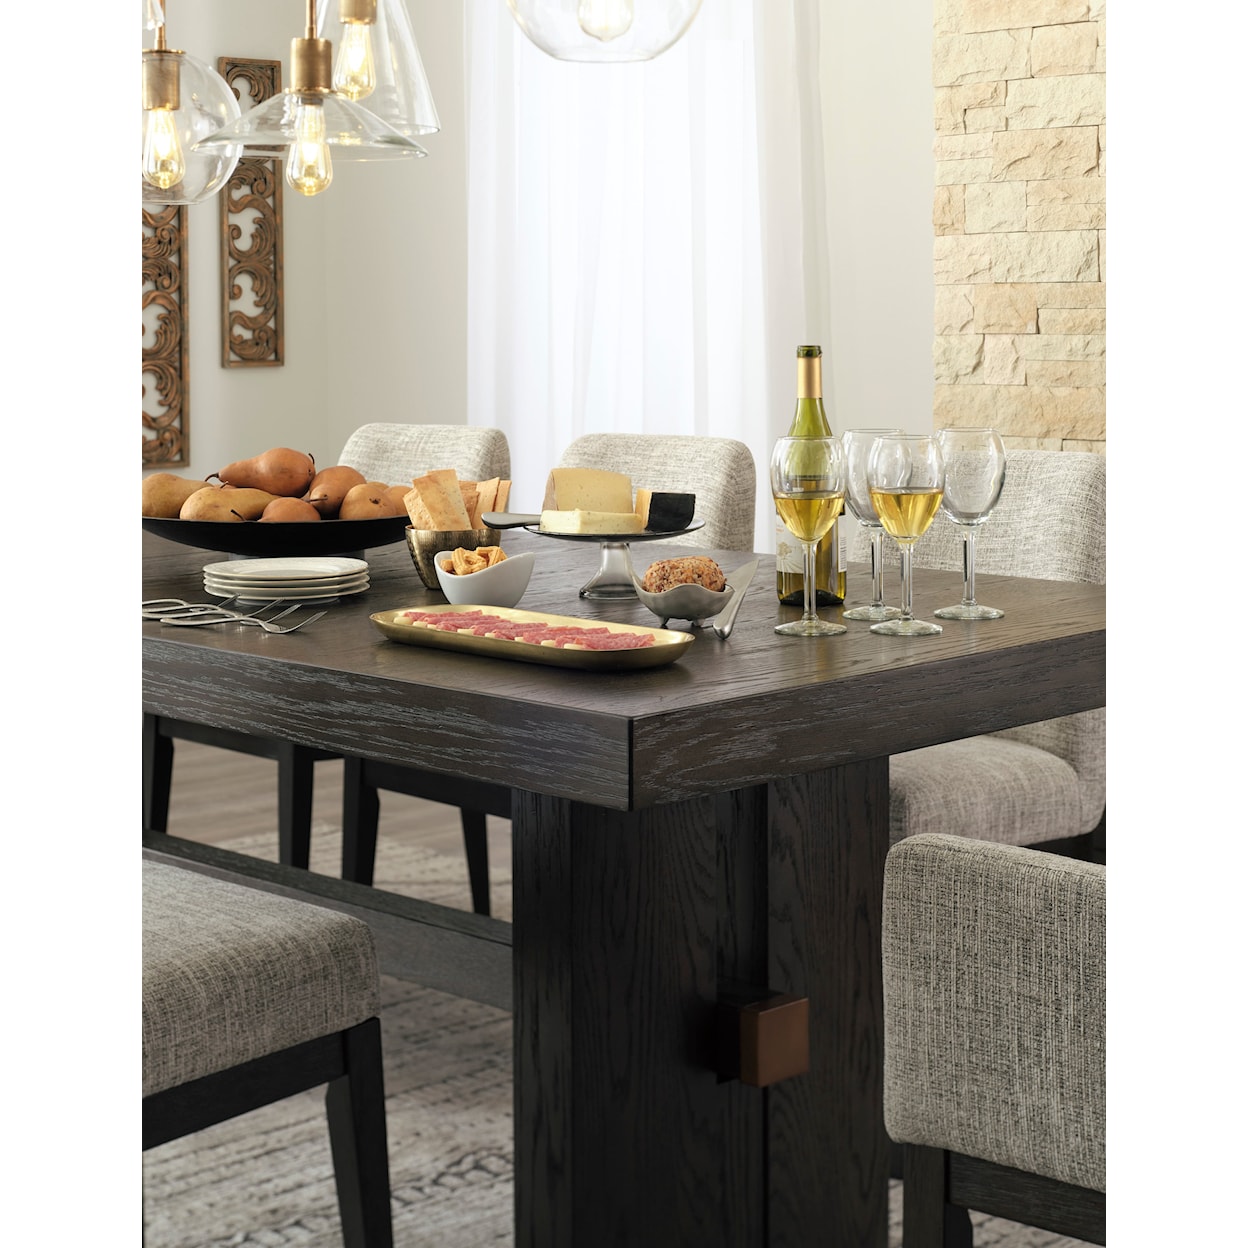 Signature Design by Ashley Furniture Burkhaus Dining Extension Table